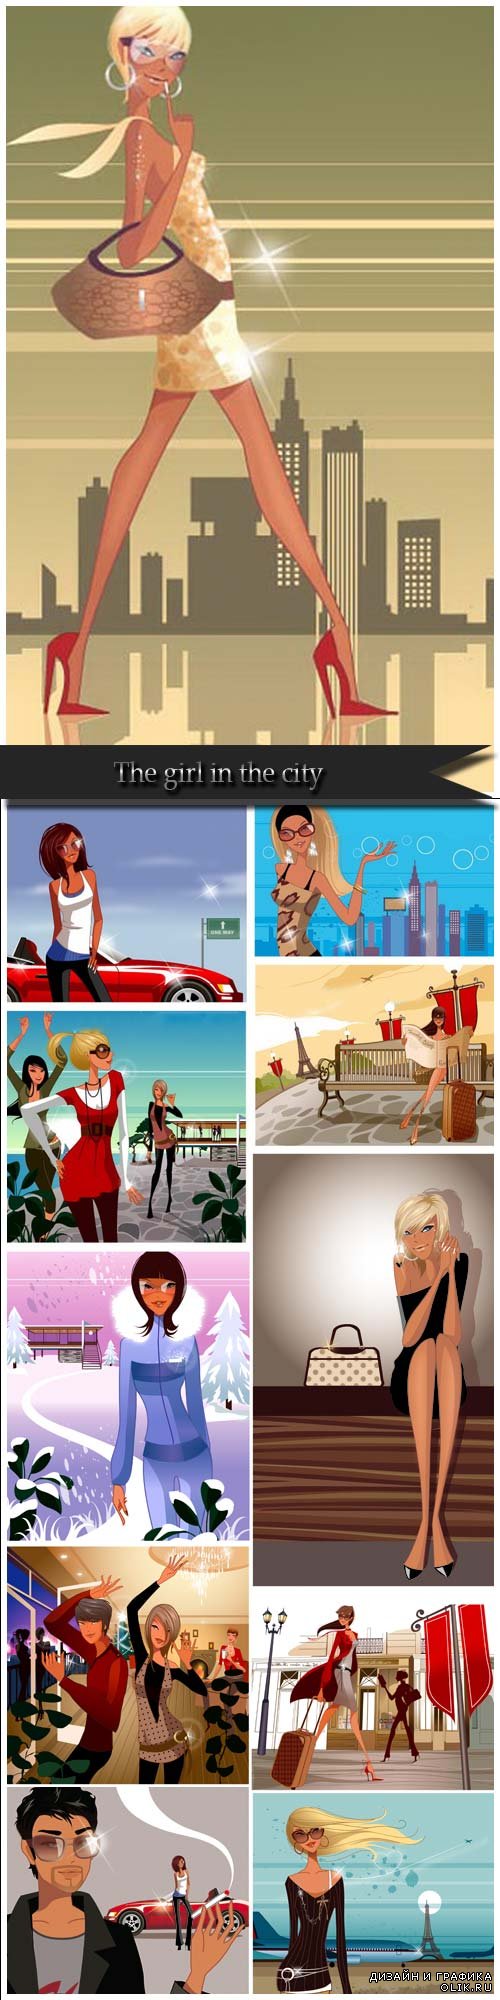 The girl in the city